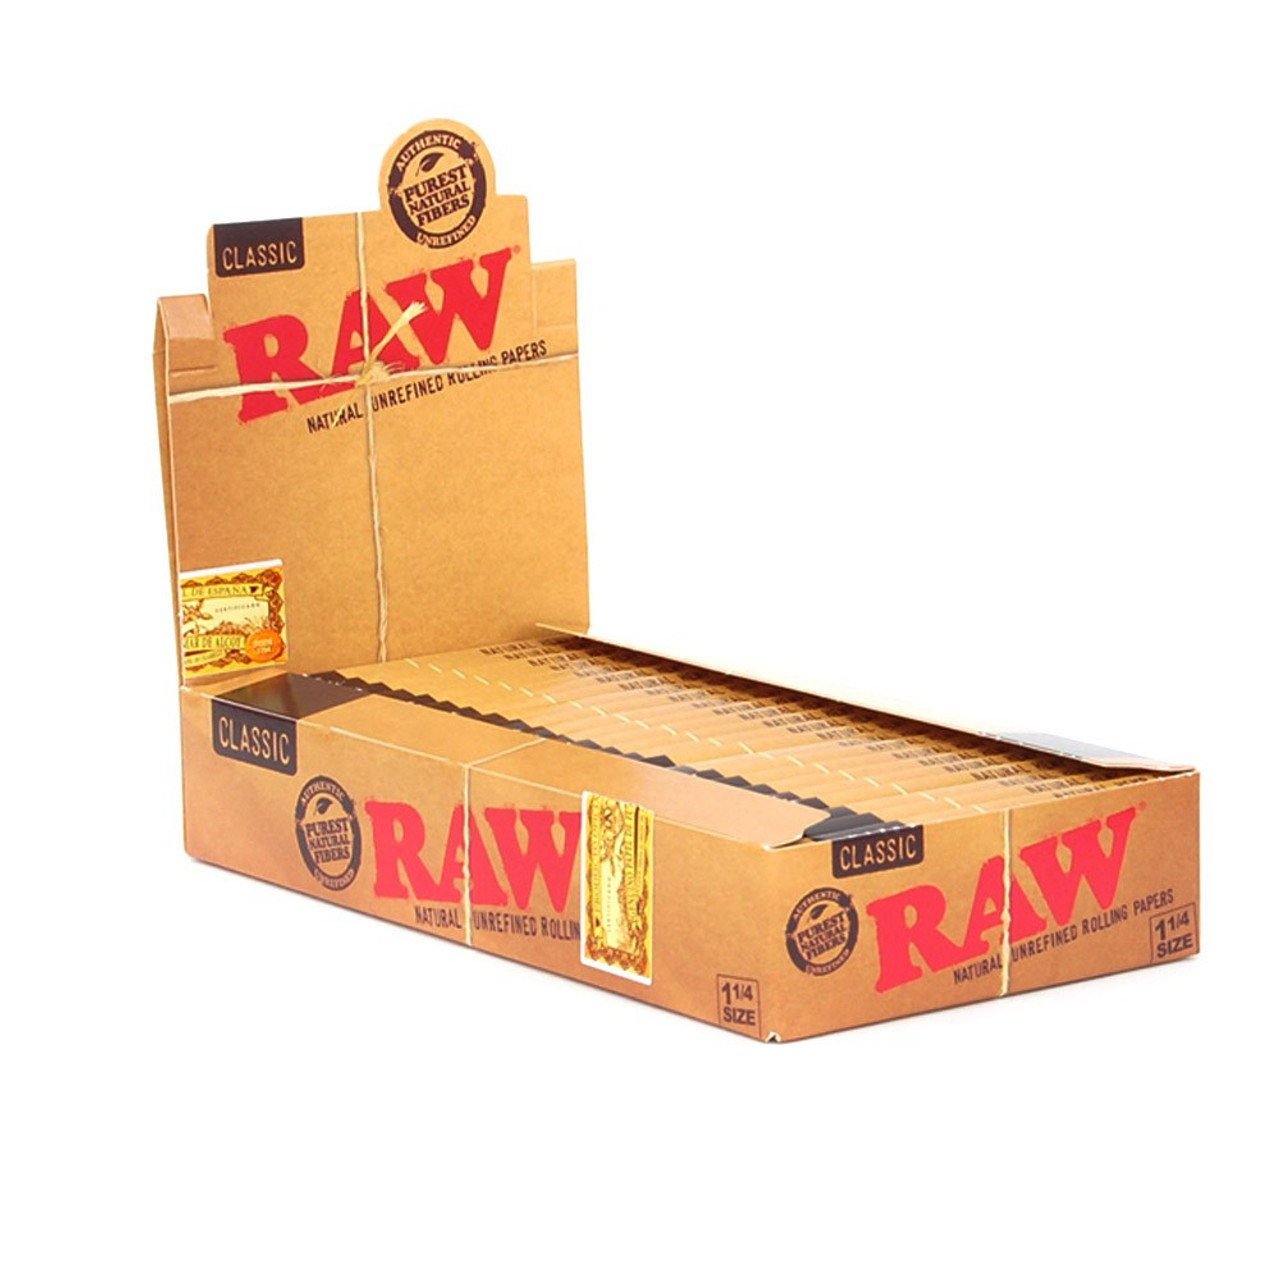 RAW Classic - 1 1/4 inch rolling papers 24 pack Retail Display